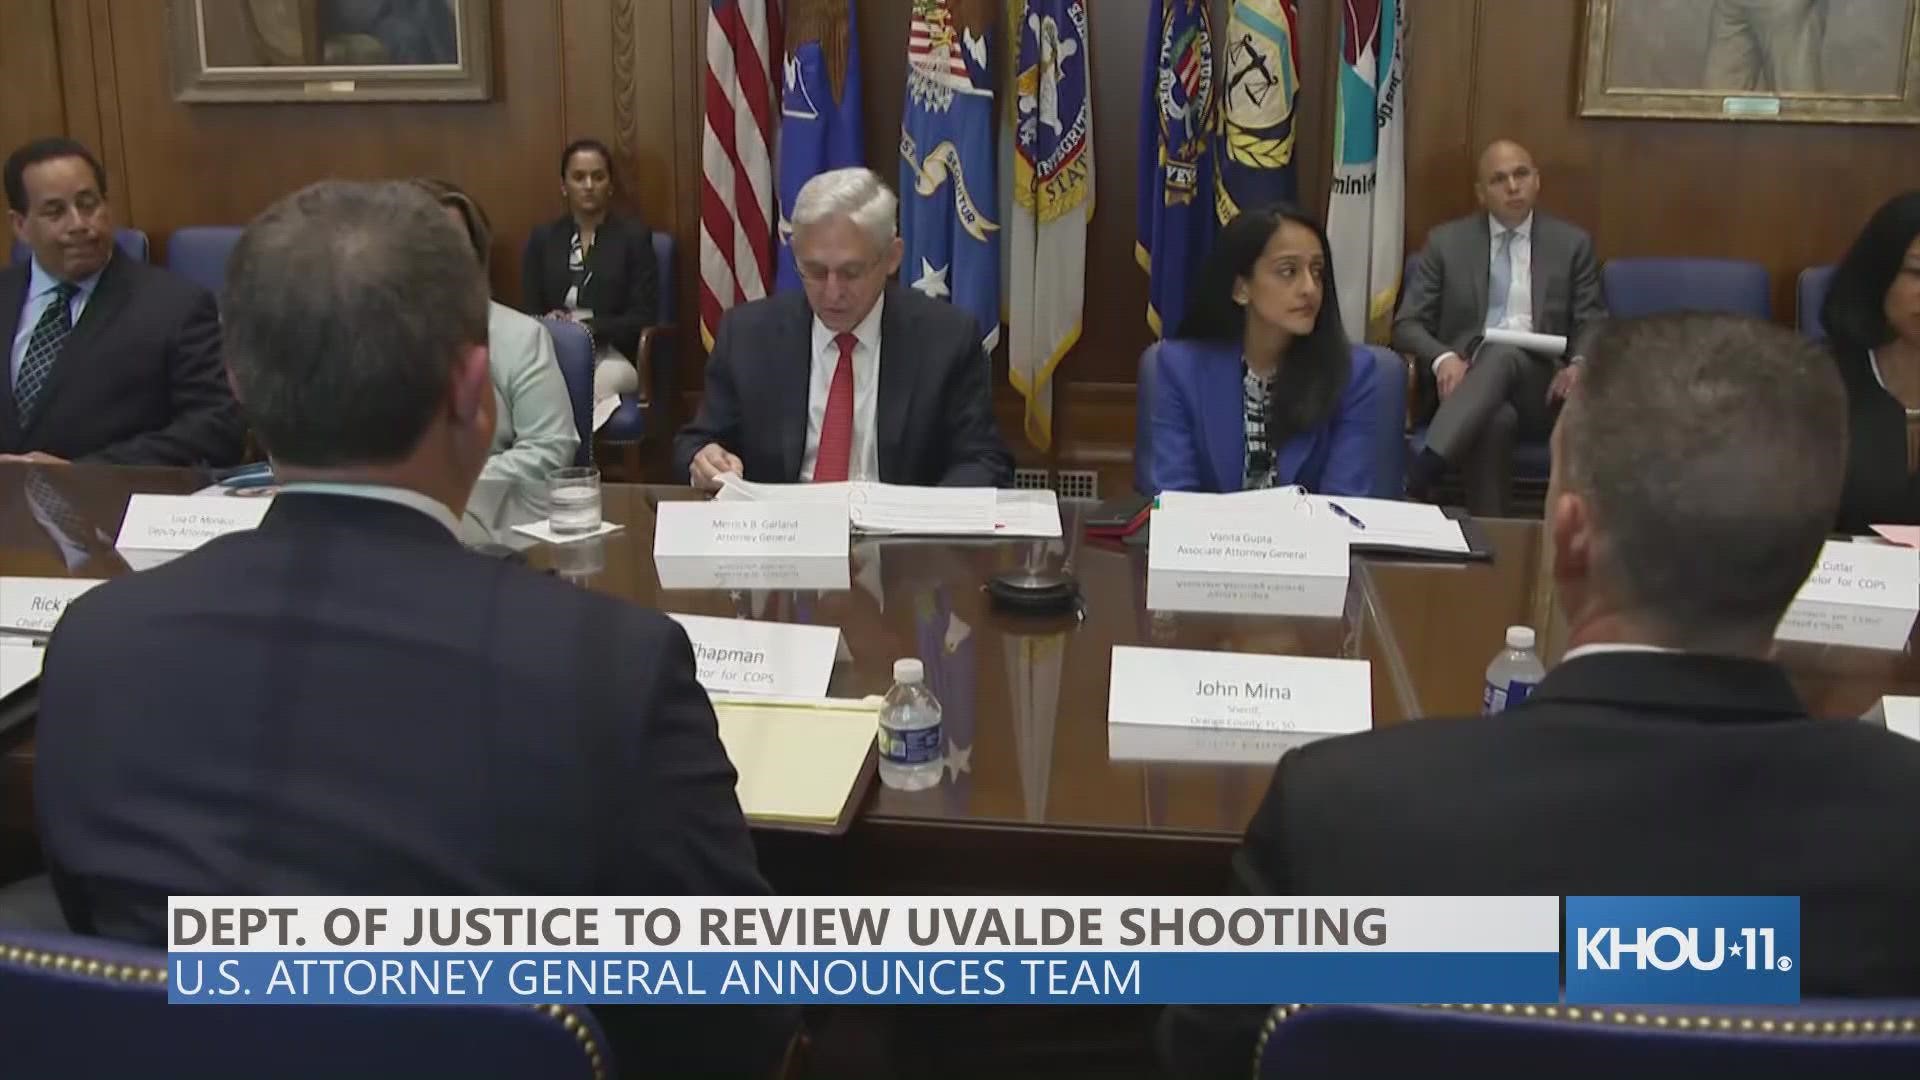 U.S. Attorney General Merrick B. Garland announced a team will conduct a critical incident review of the mass shooting in Uvalde, Texas.